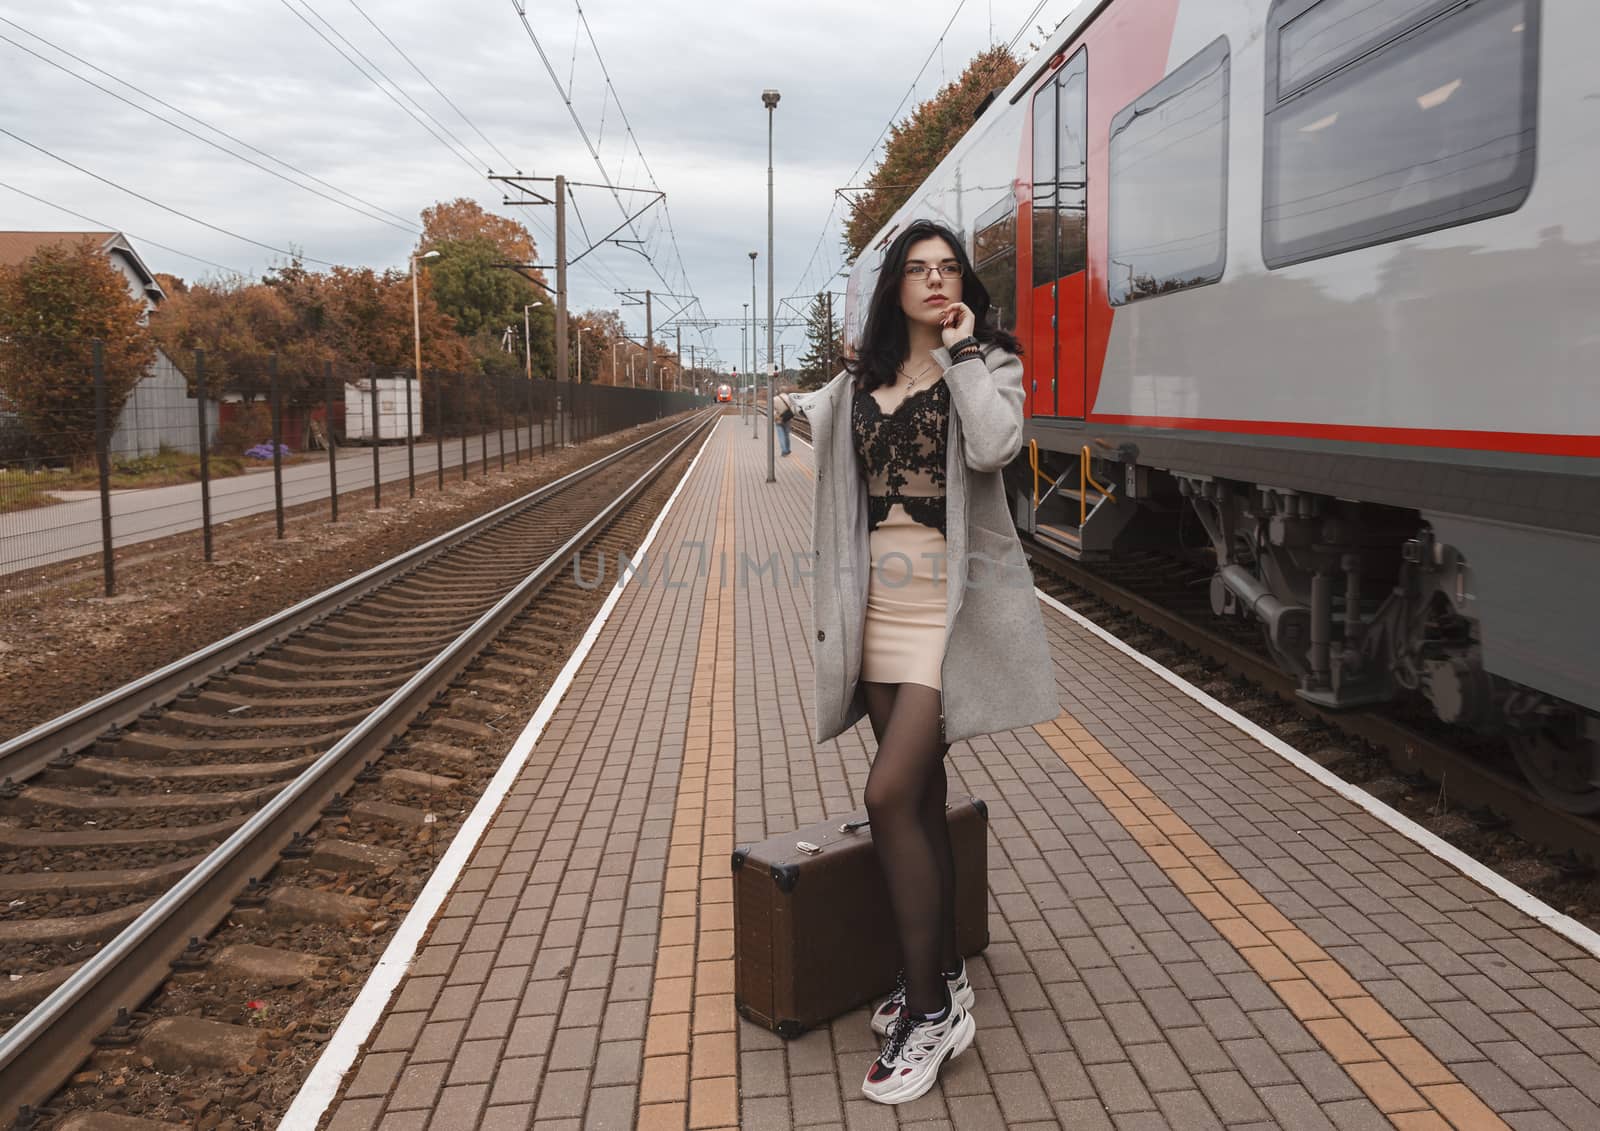 lonely young girl in gray coat with suitcase standing at railway station on gloomy autumn day